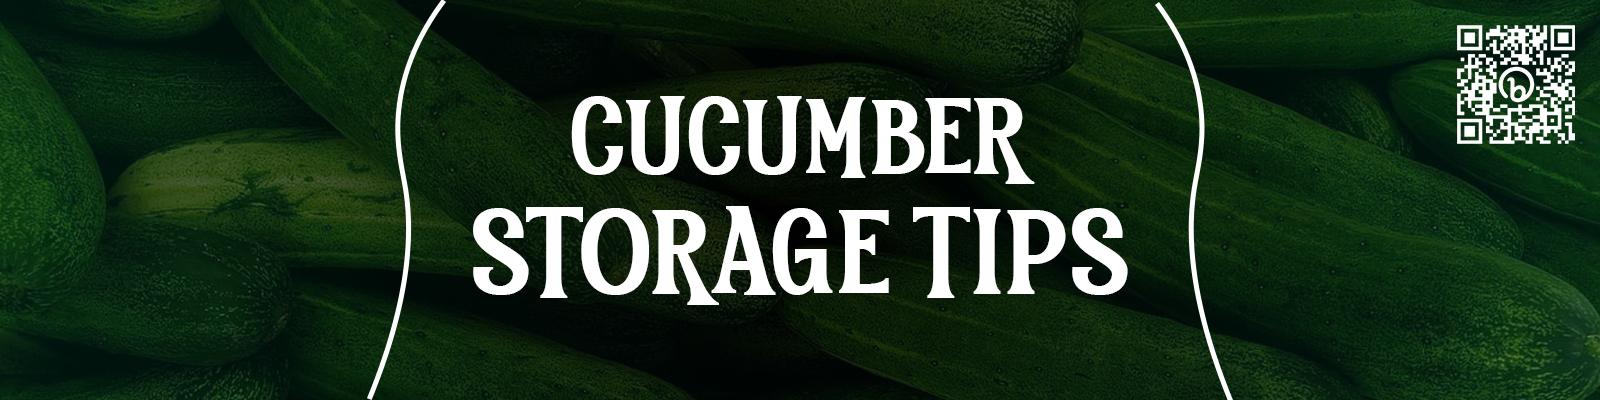 Learn How to Store Cucumbers for Longer-Lasting Cukes